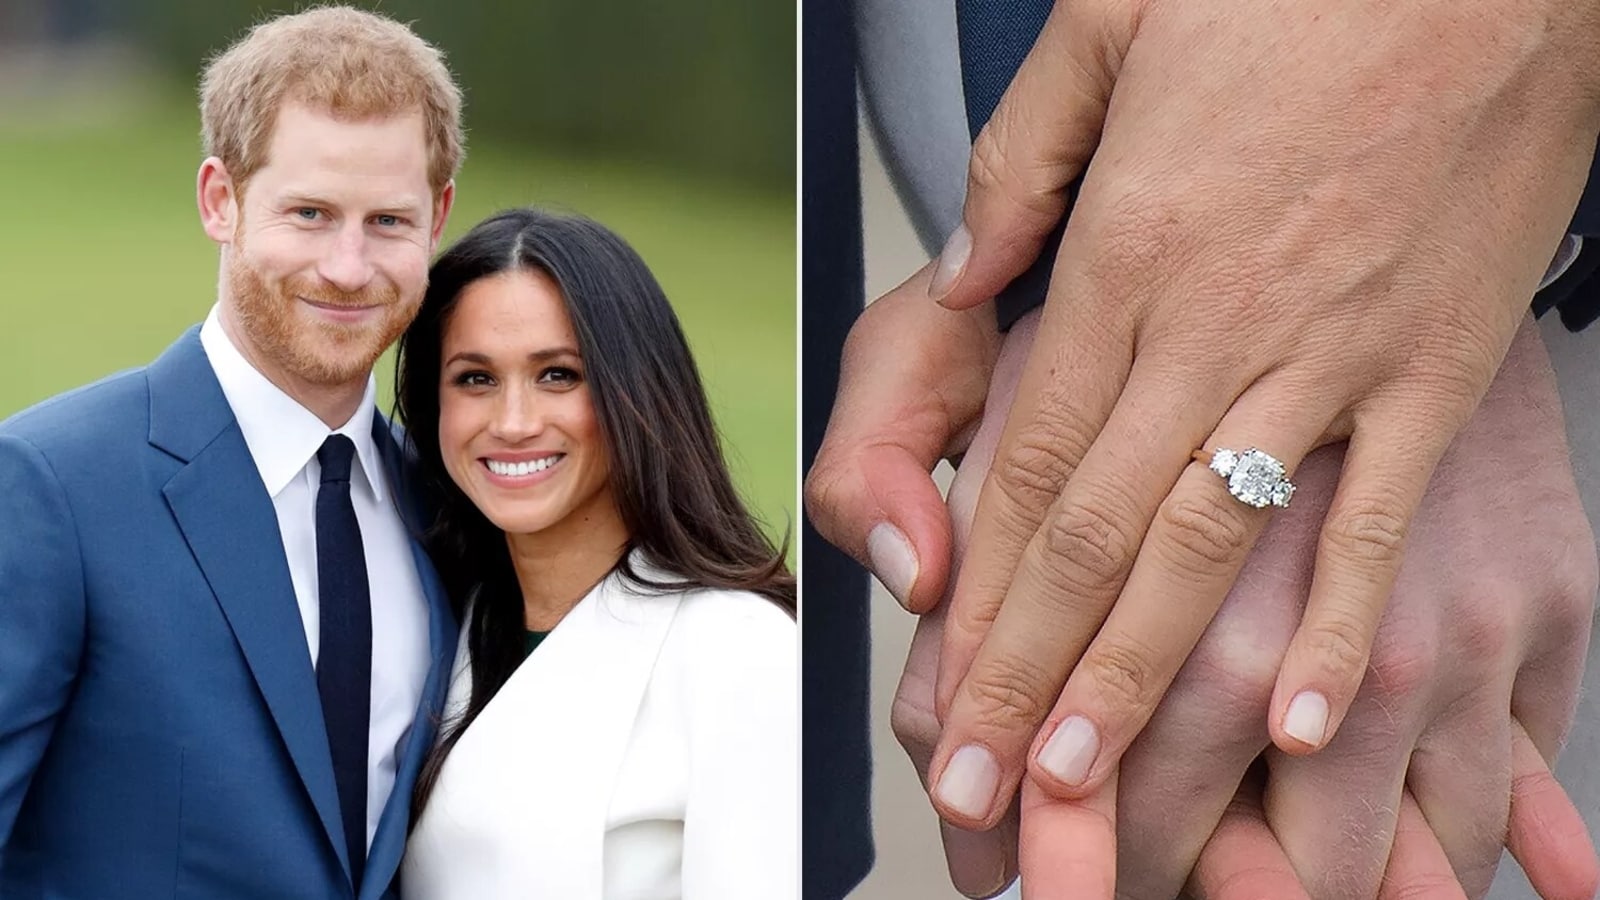 Did Meghan Markle's engagement ring just beat Kate Middleton's as world's most-searched?